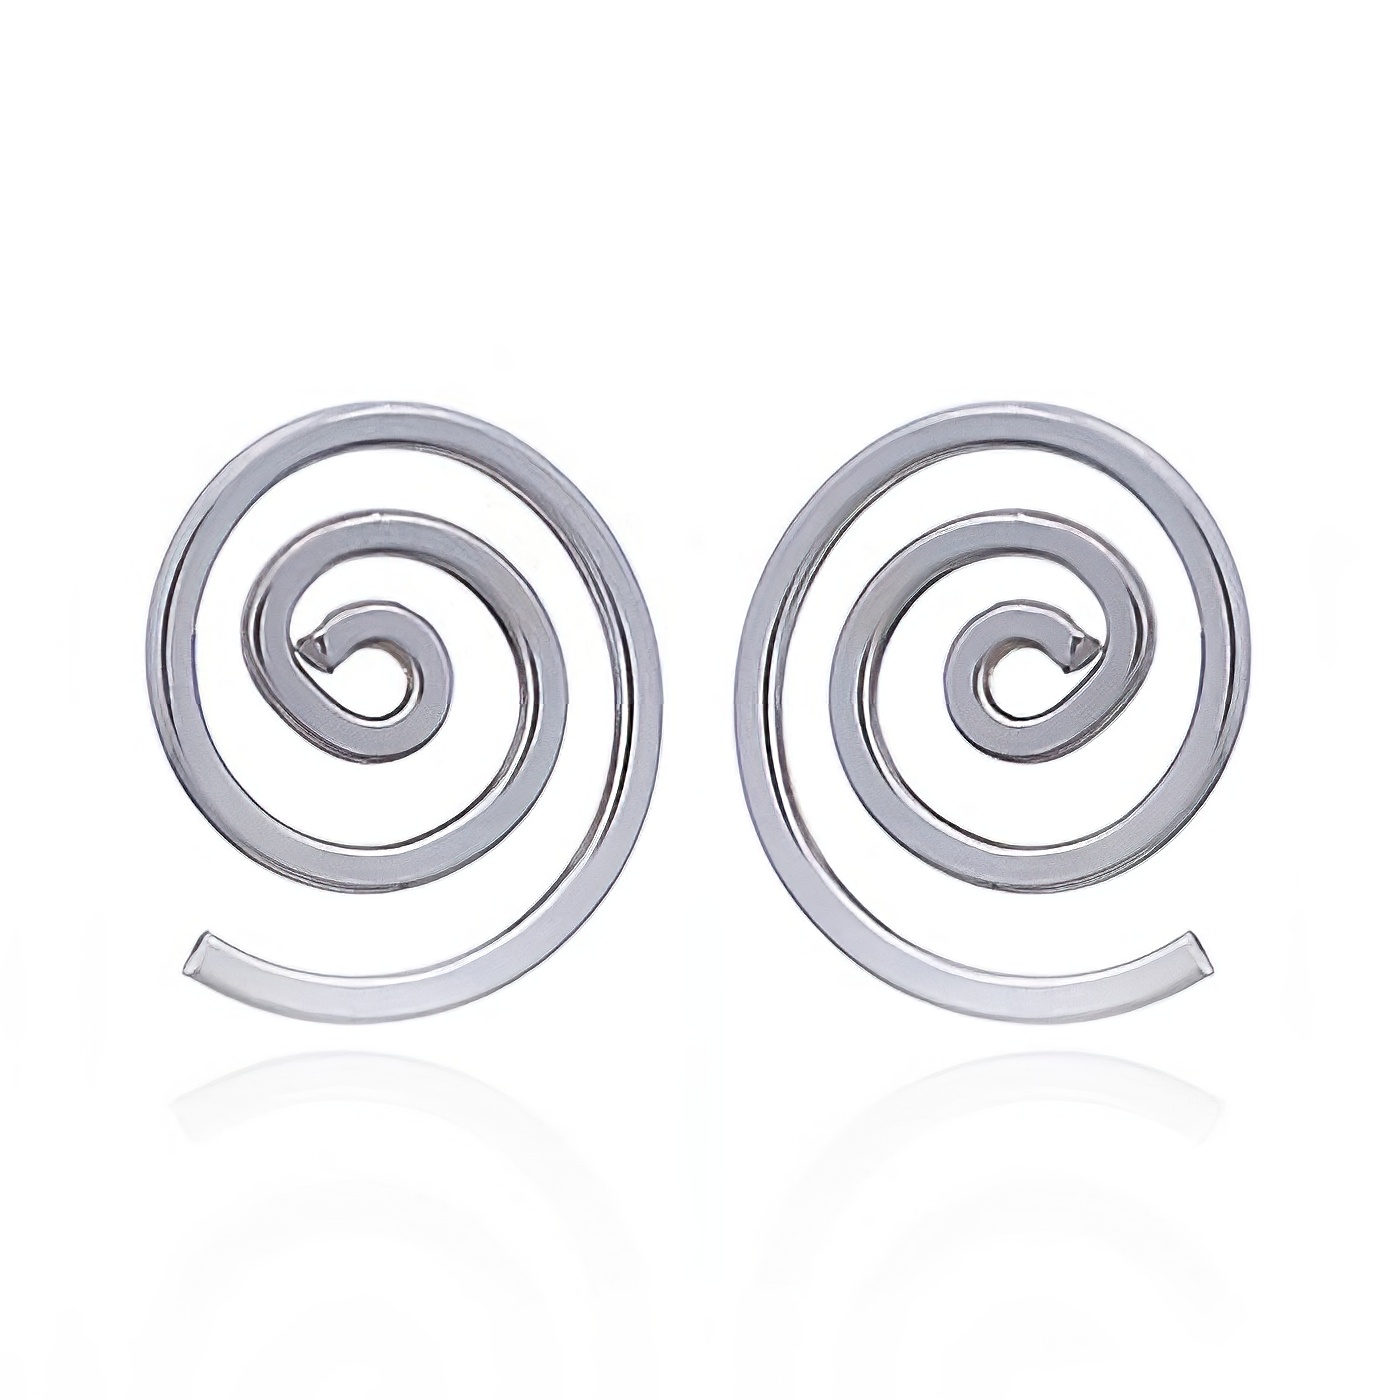 Timeless Stylish Sterling Silver Wirework Spiral Stud Earrings by BeYindi 